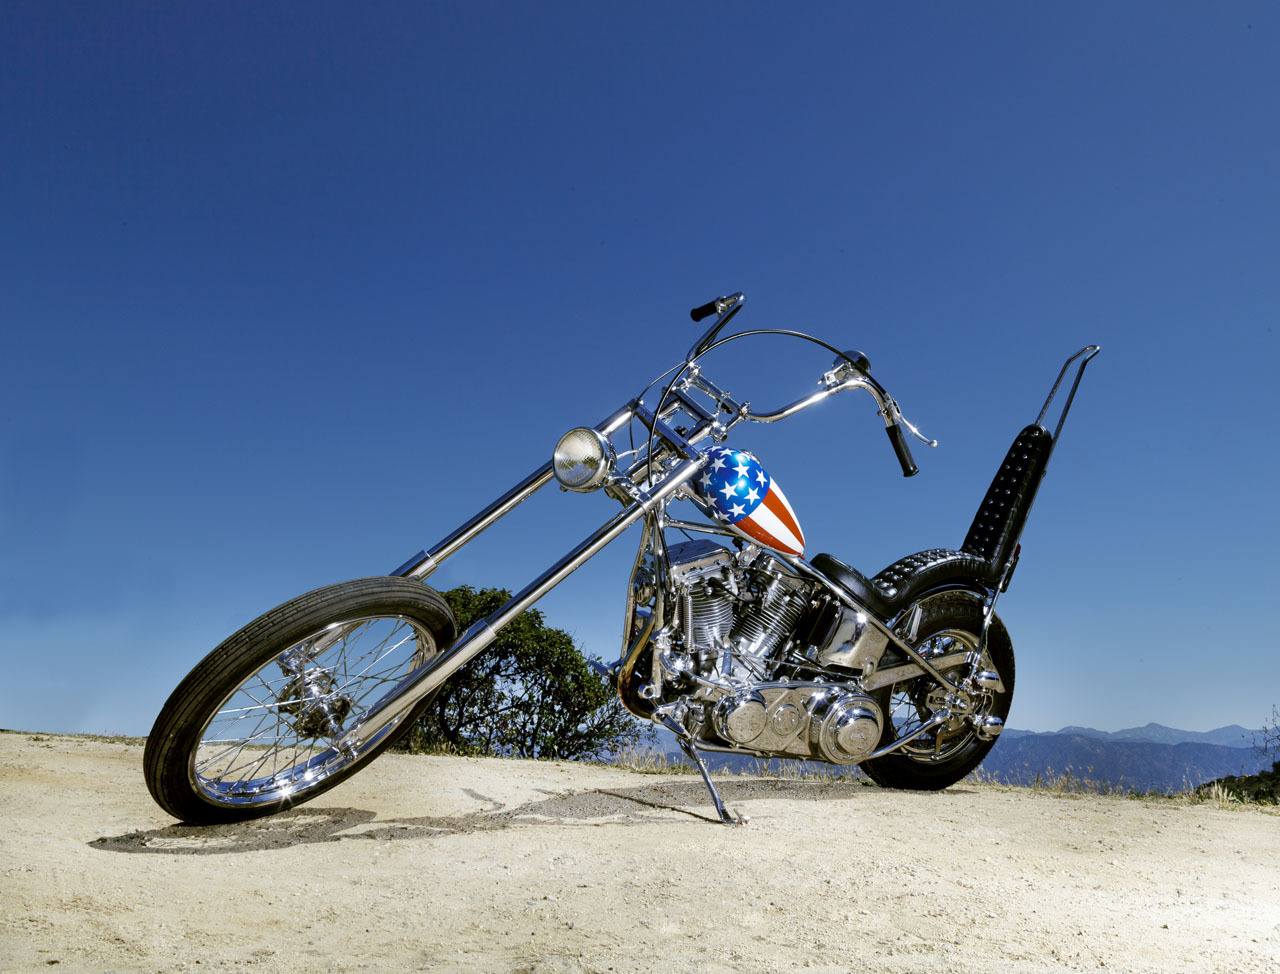 Easy Rider Captain America Motorcycle Auction Photo Gallery   Autoblog